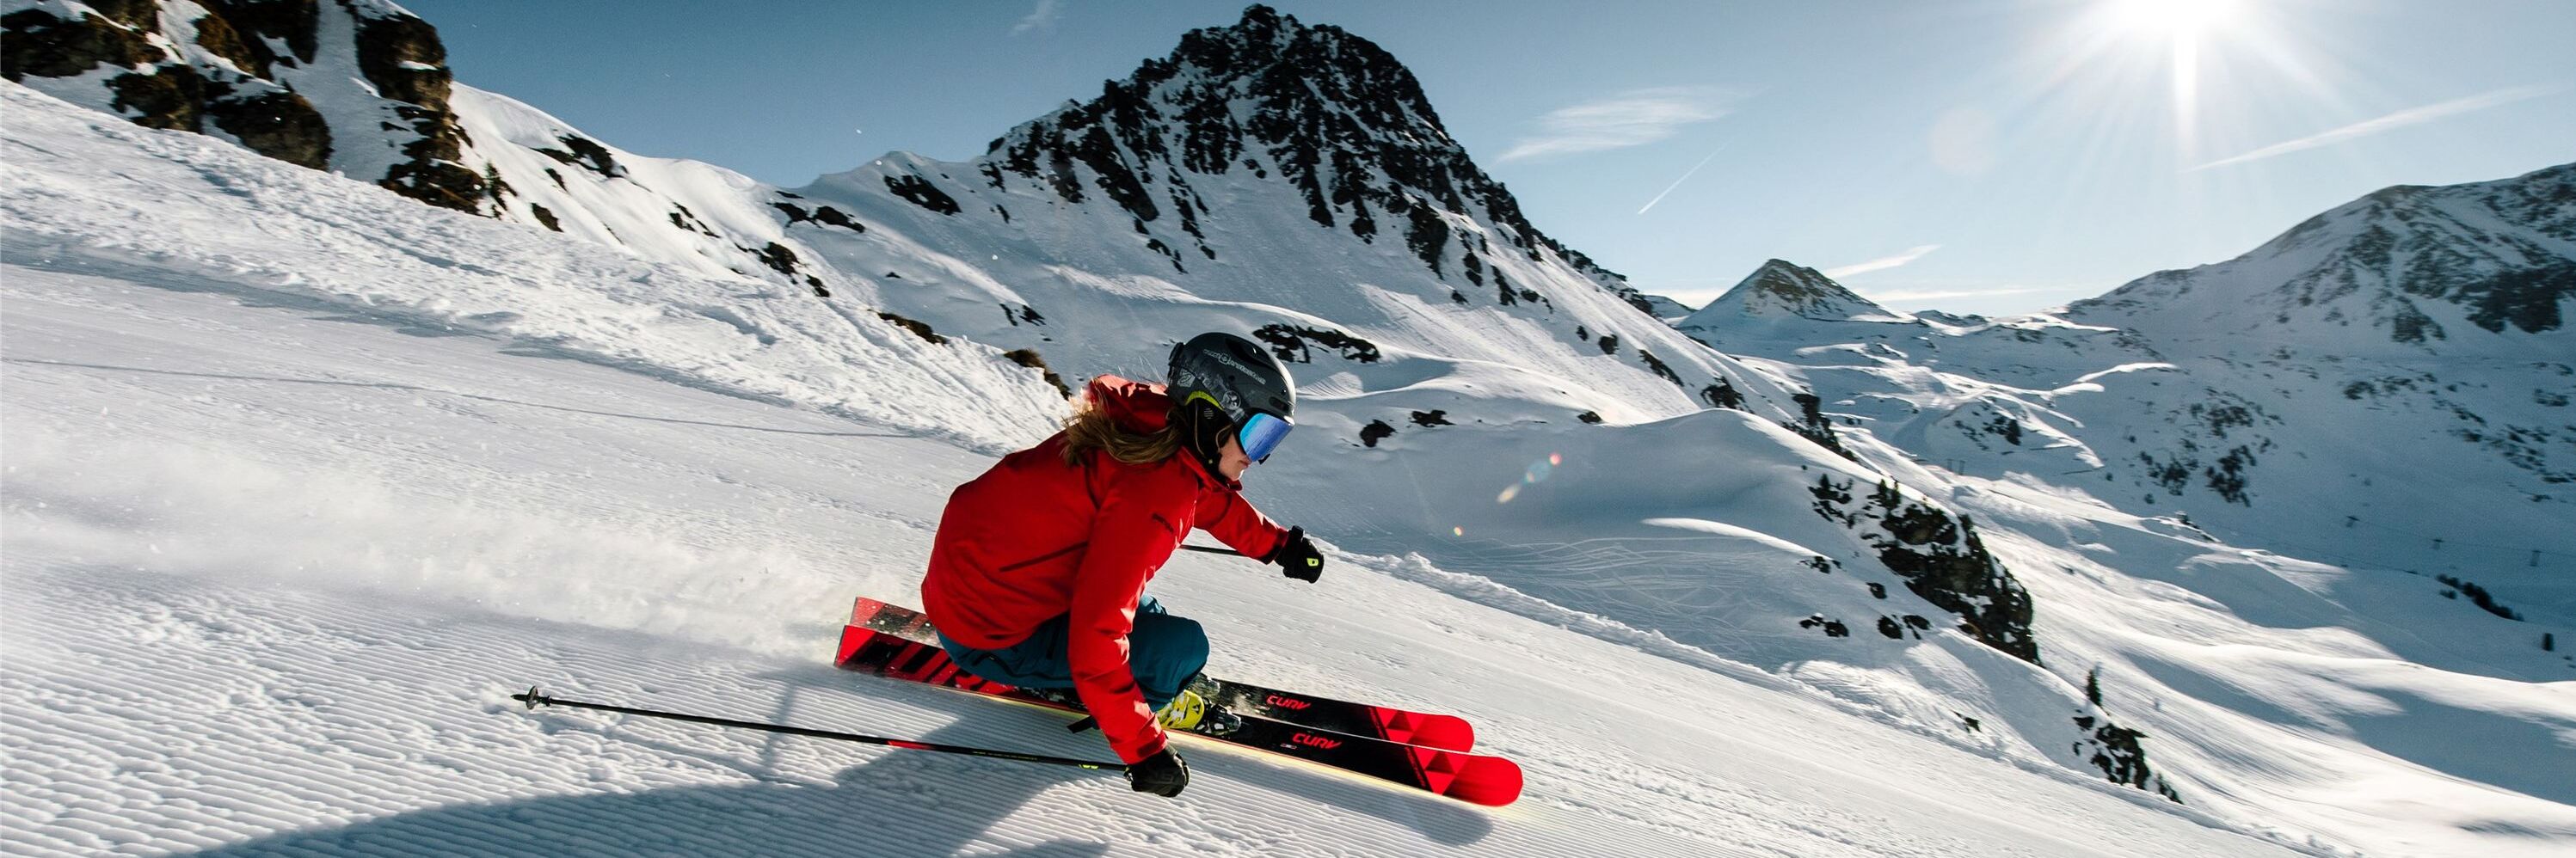 Woman skiing on the slope